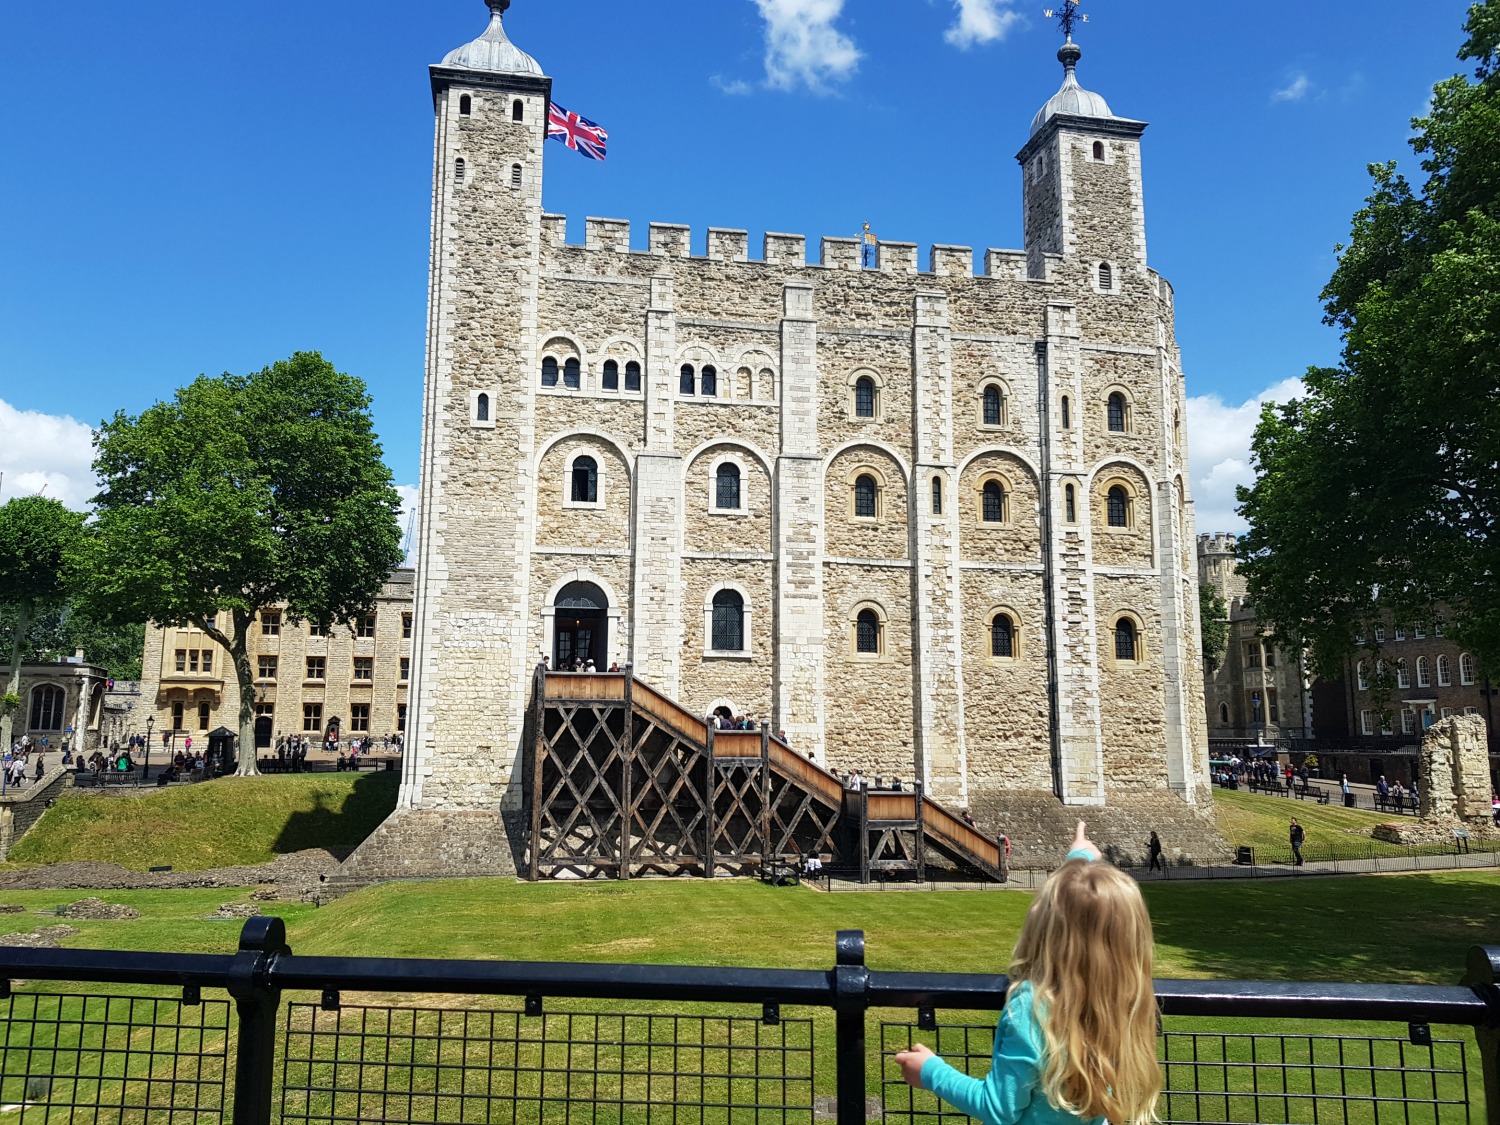 My daughter points up at the White Tower in the Tower of London with blue skies in the background - there are Coronation themed activities taking place here this May half-term in London with kids